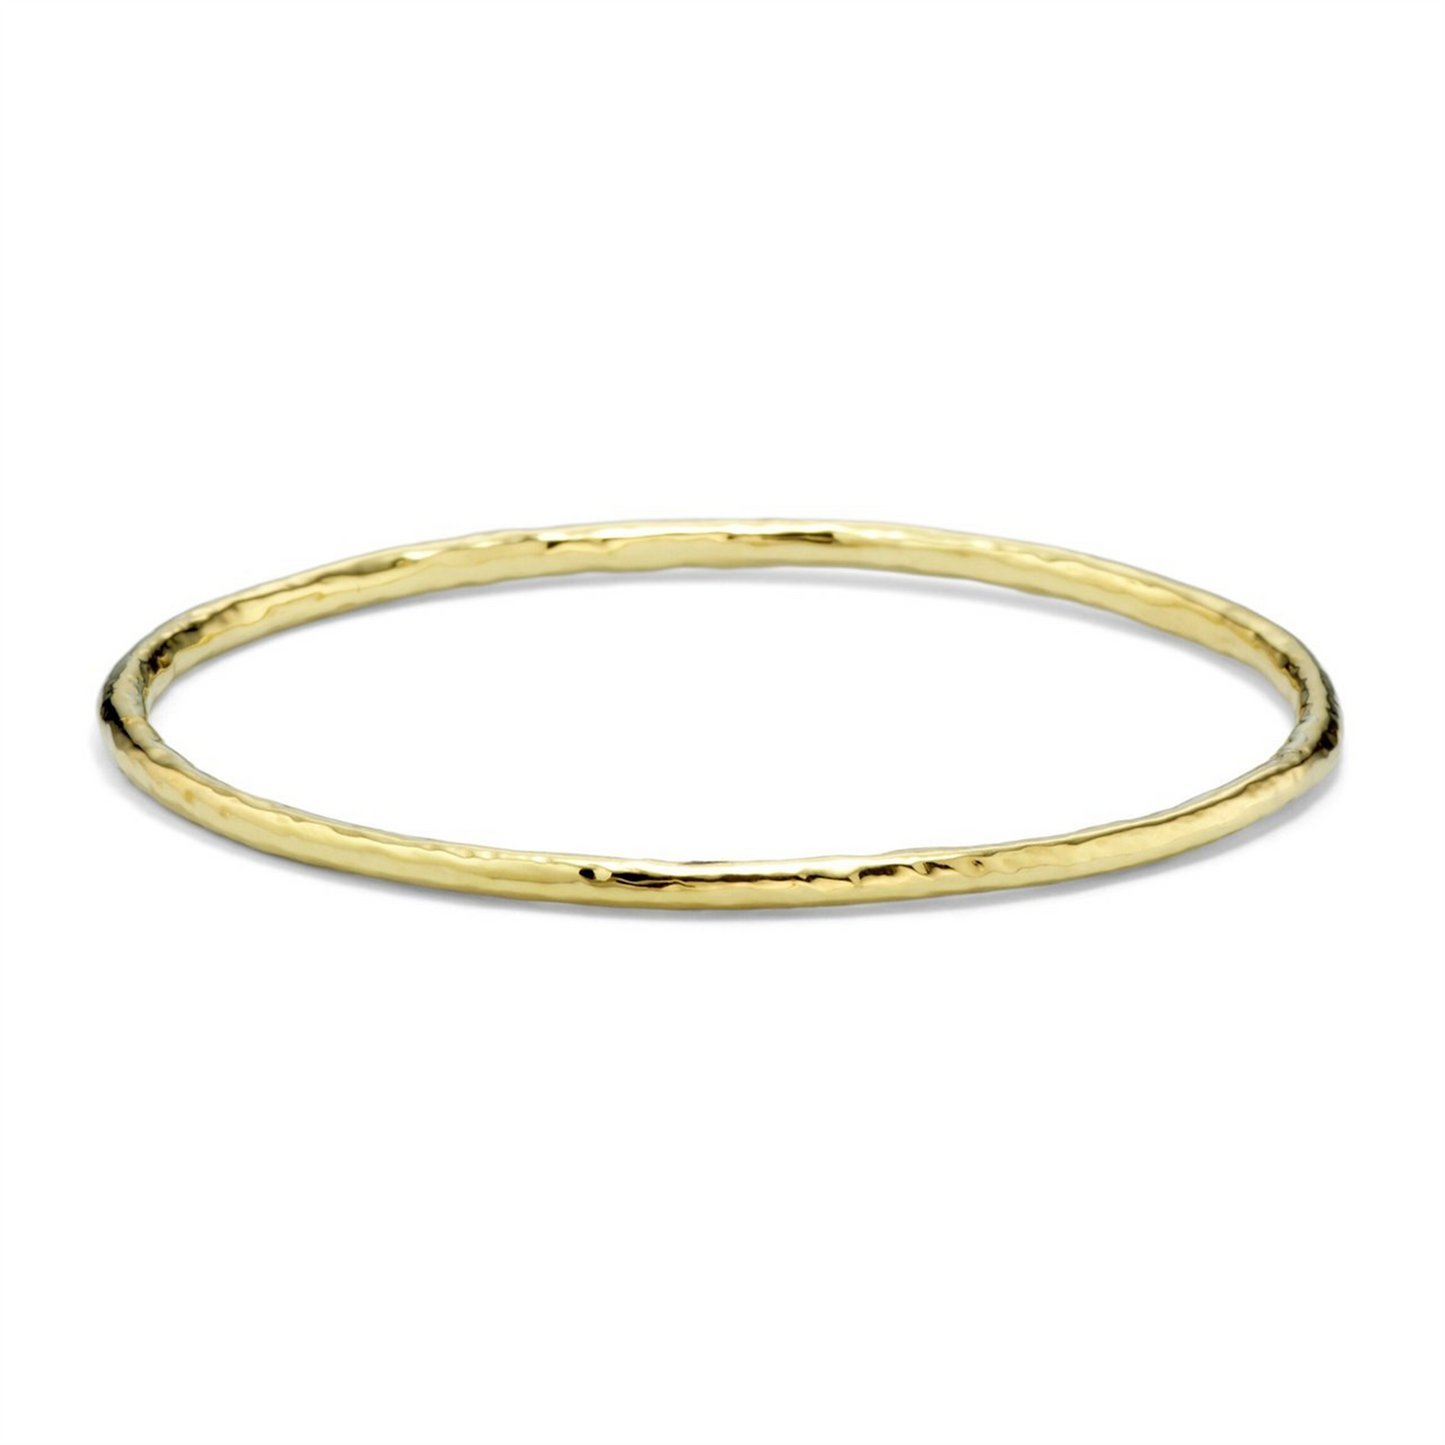 Ippolita Small Hammered Bangle in 18K Gold